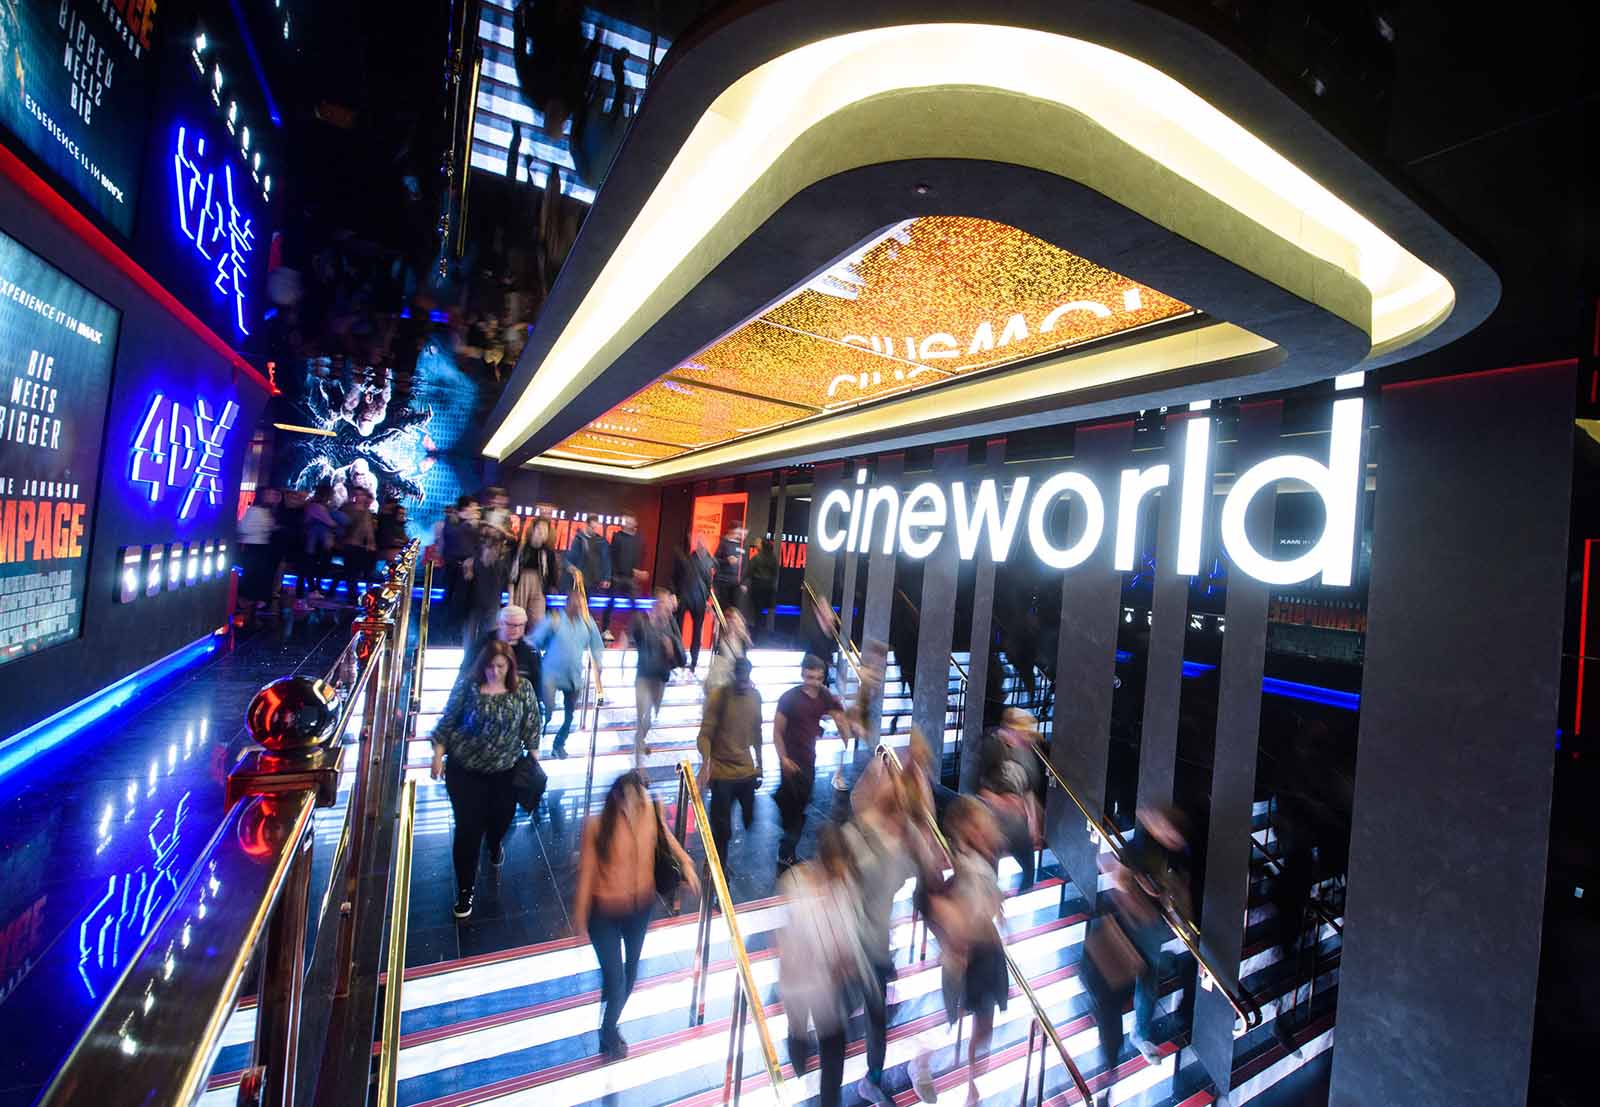 Regal Cinemas parent company Cineworld announced today they're considering temporary location closures. Is it because of 'No Time to Die'?